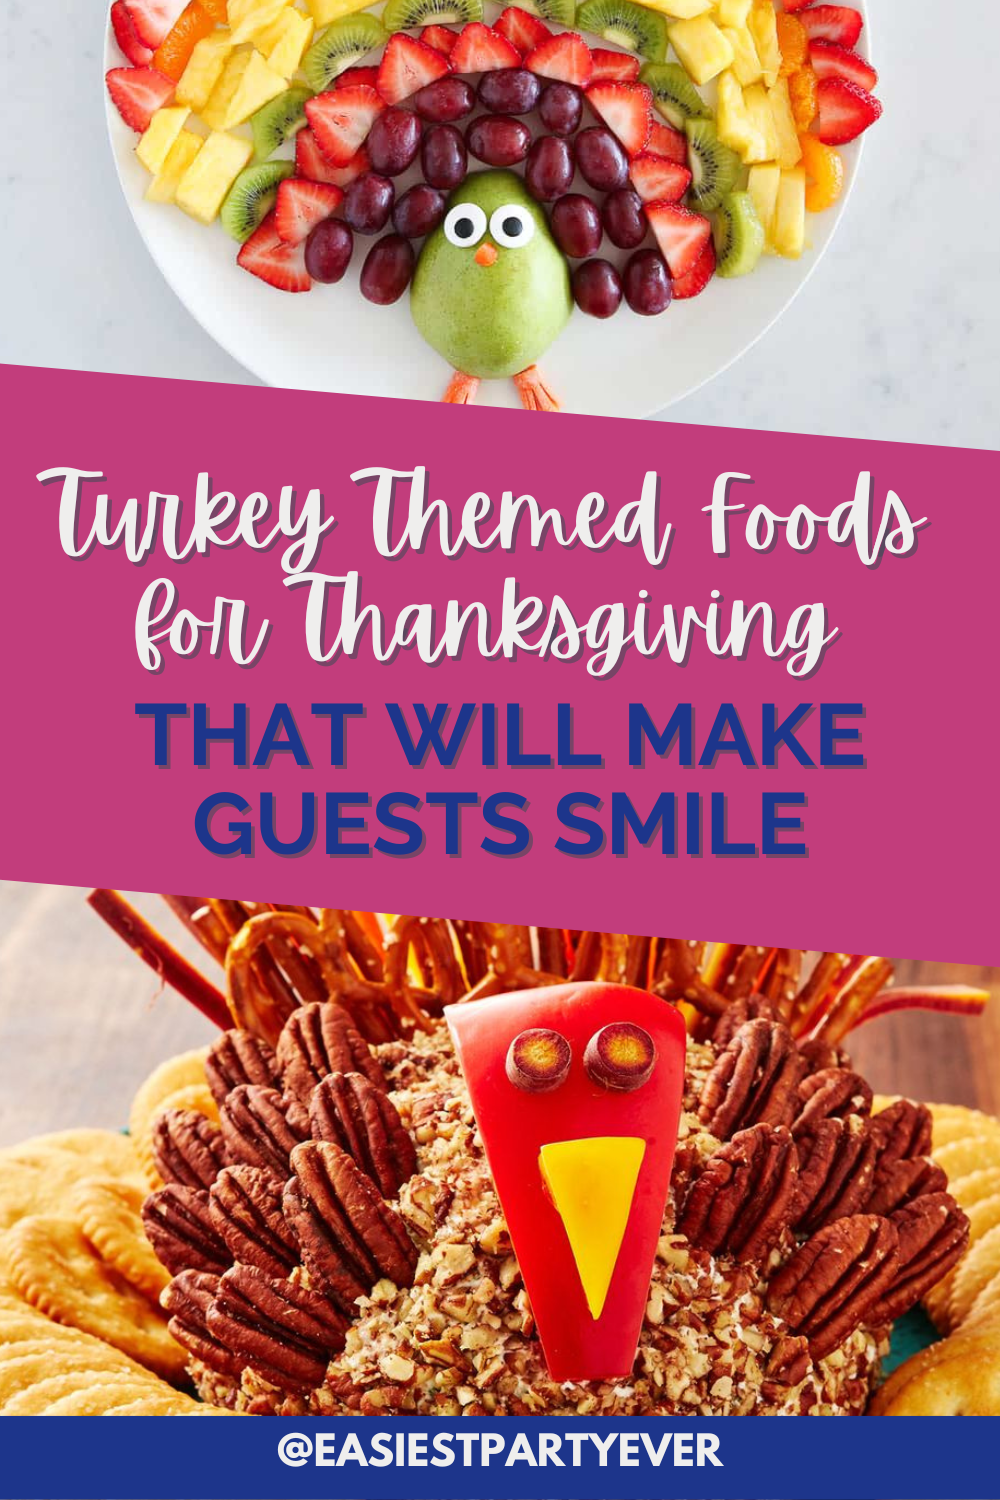 Turkey Themed foods for Thanksgiving that will make guests smile